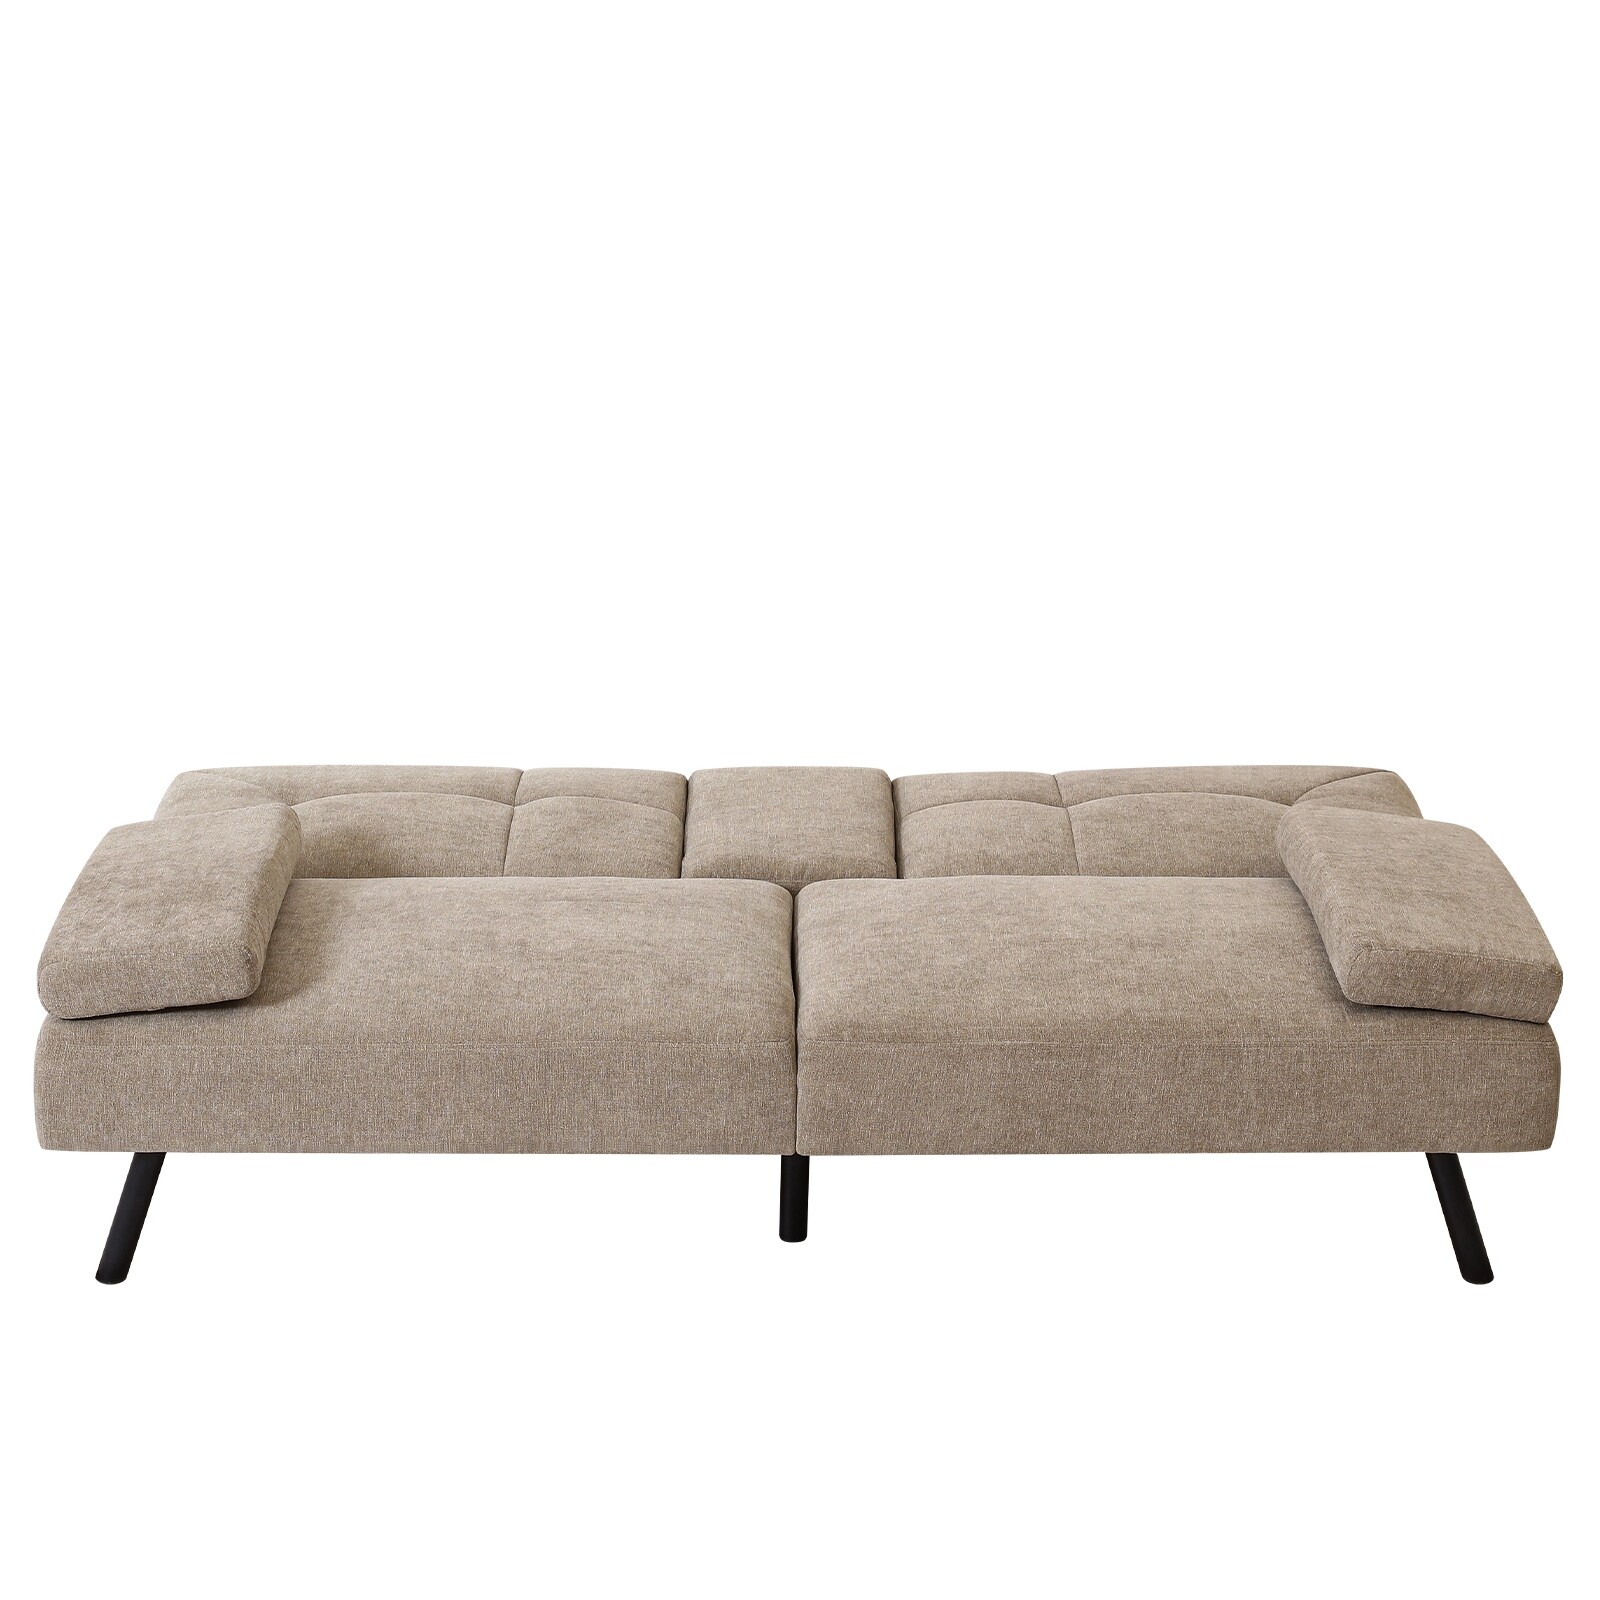 Sofa Bed Loveseat Fabric Upholstered Futon Sleeper with Cupholders